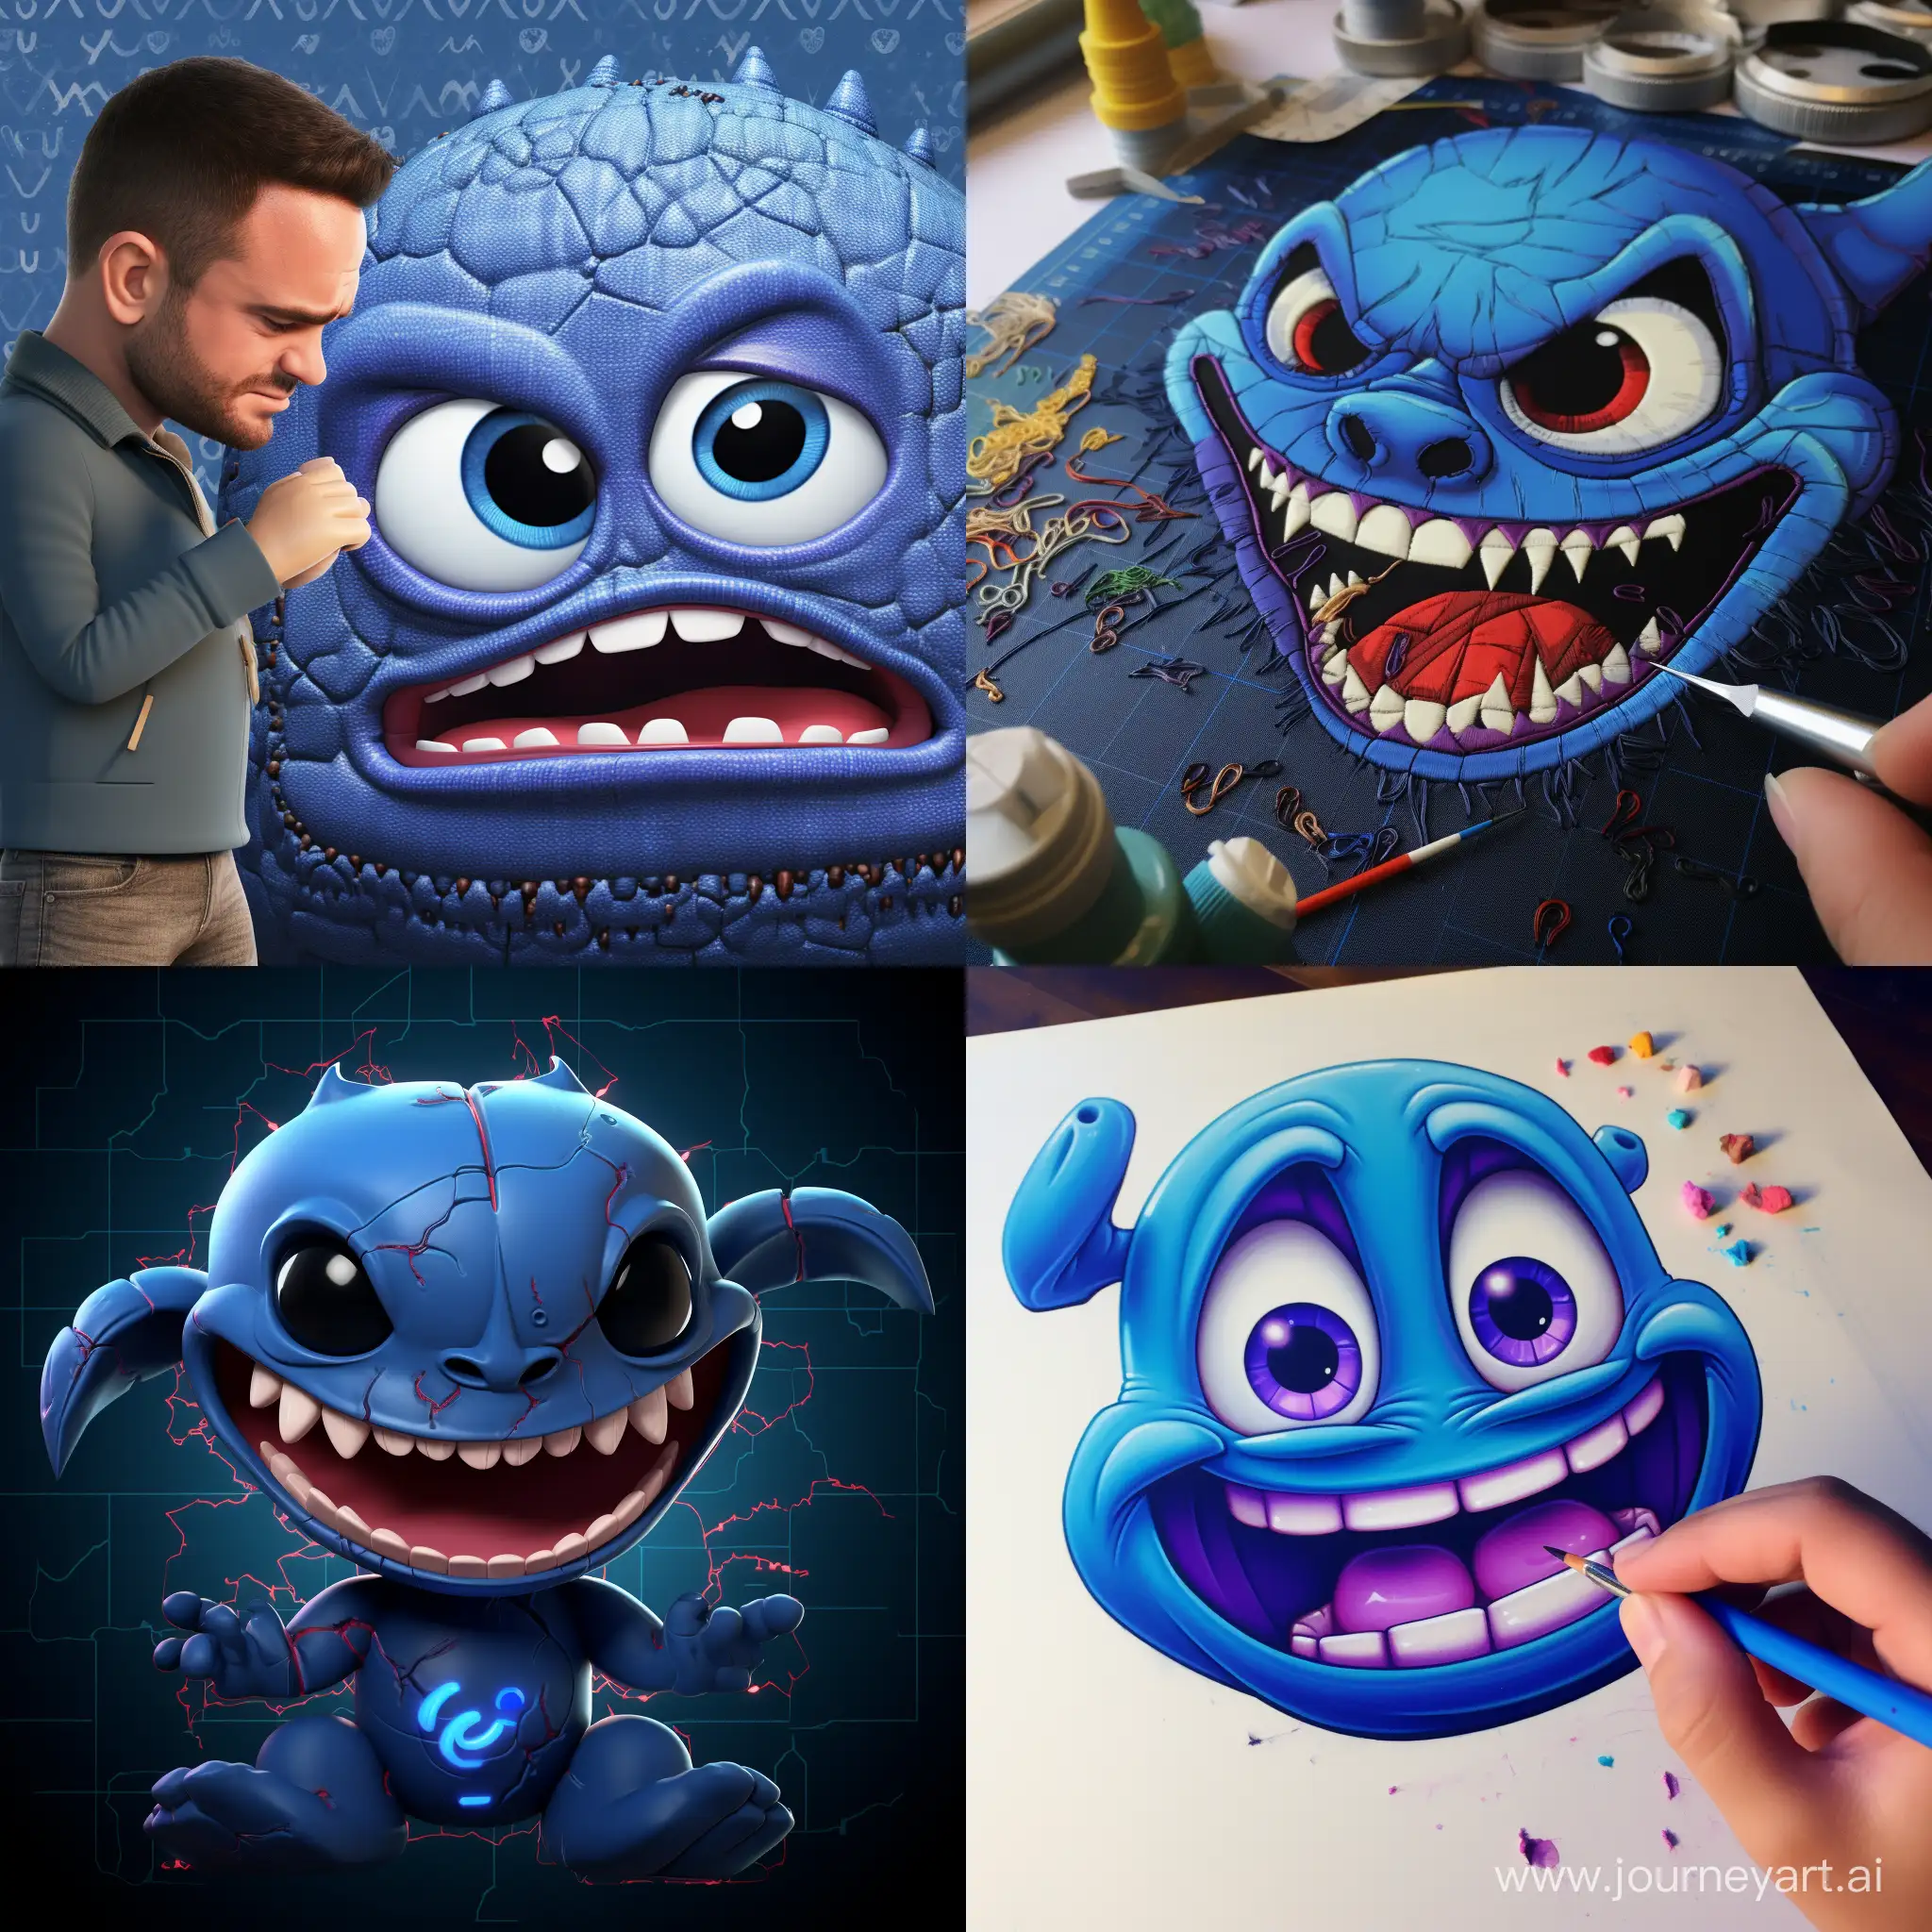 Stitch making the snapping emoji with his fingers